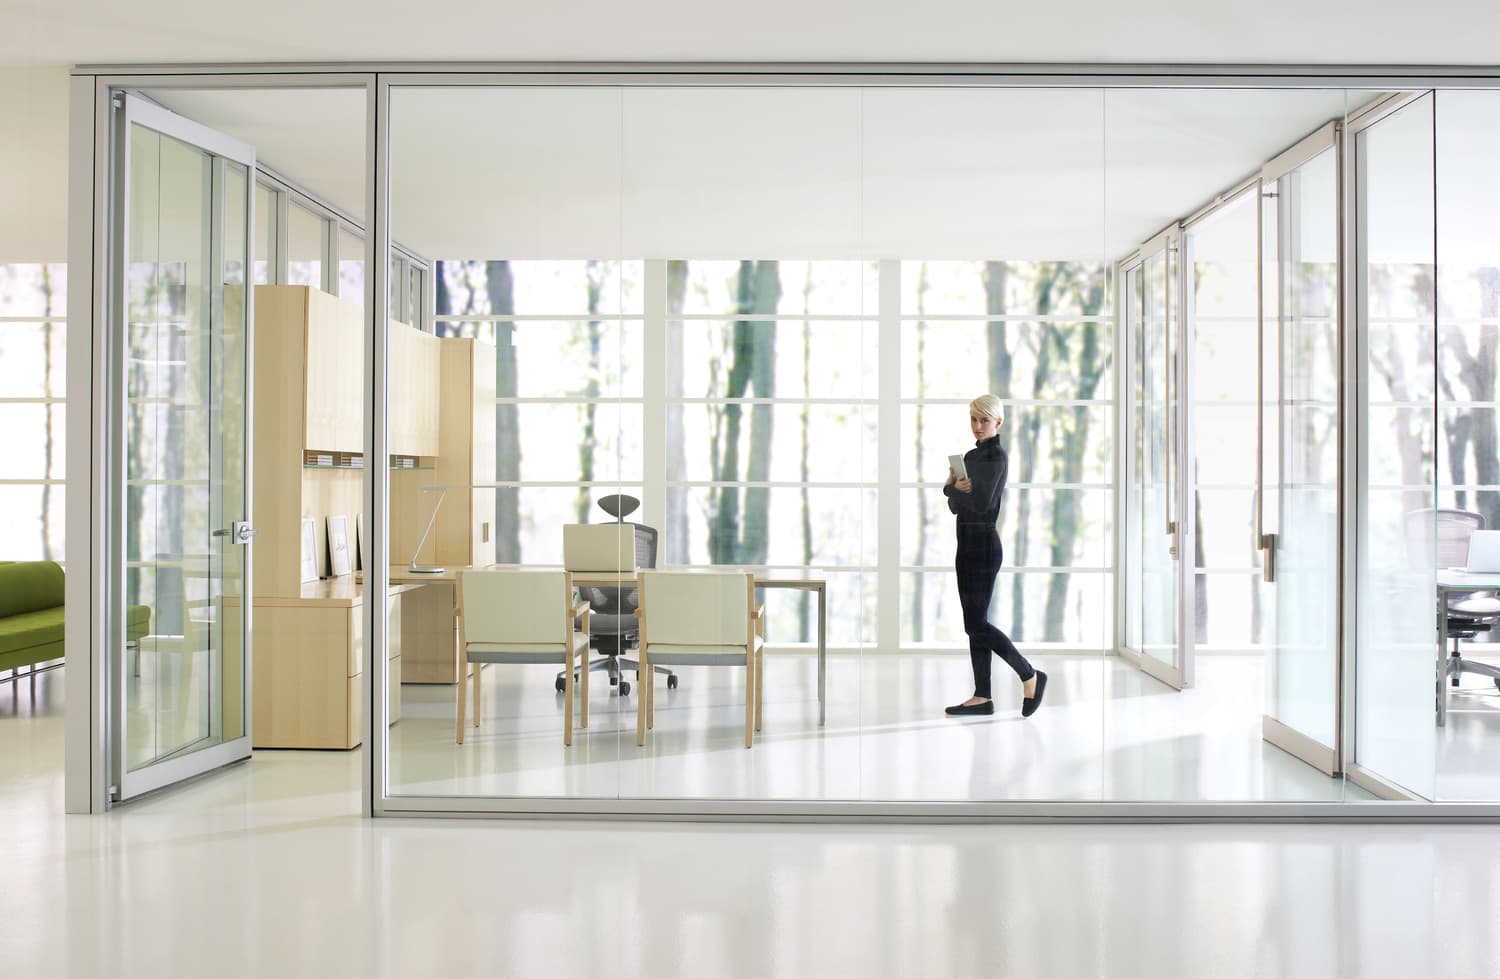 Optos glass storefront system by Teknion